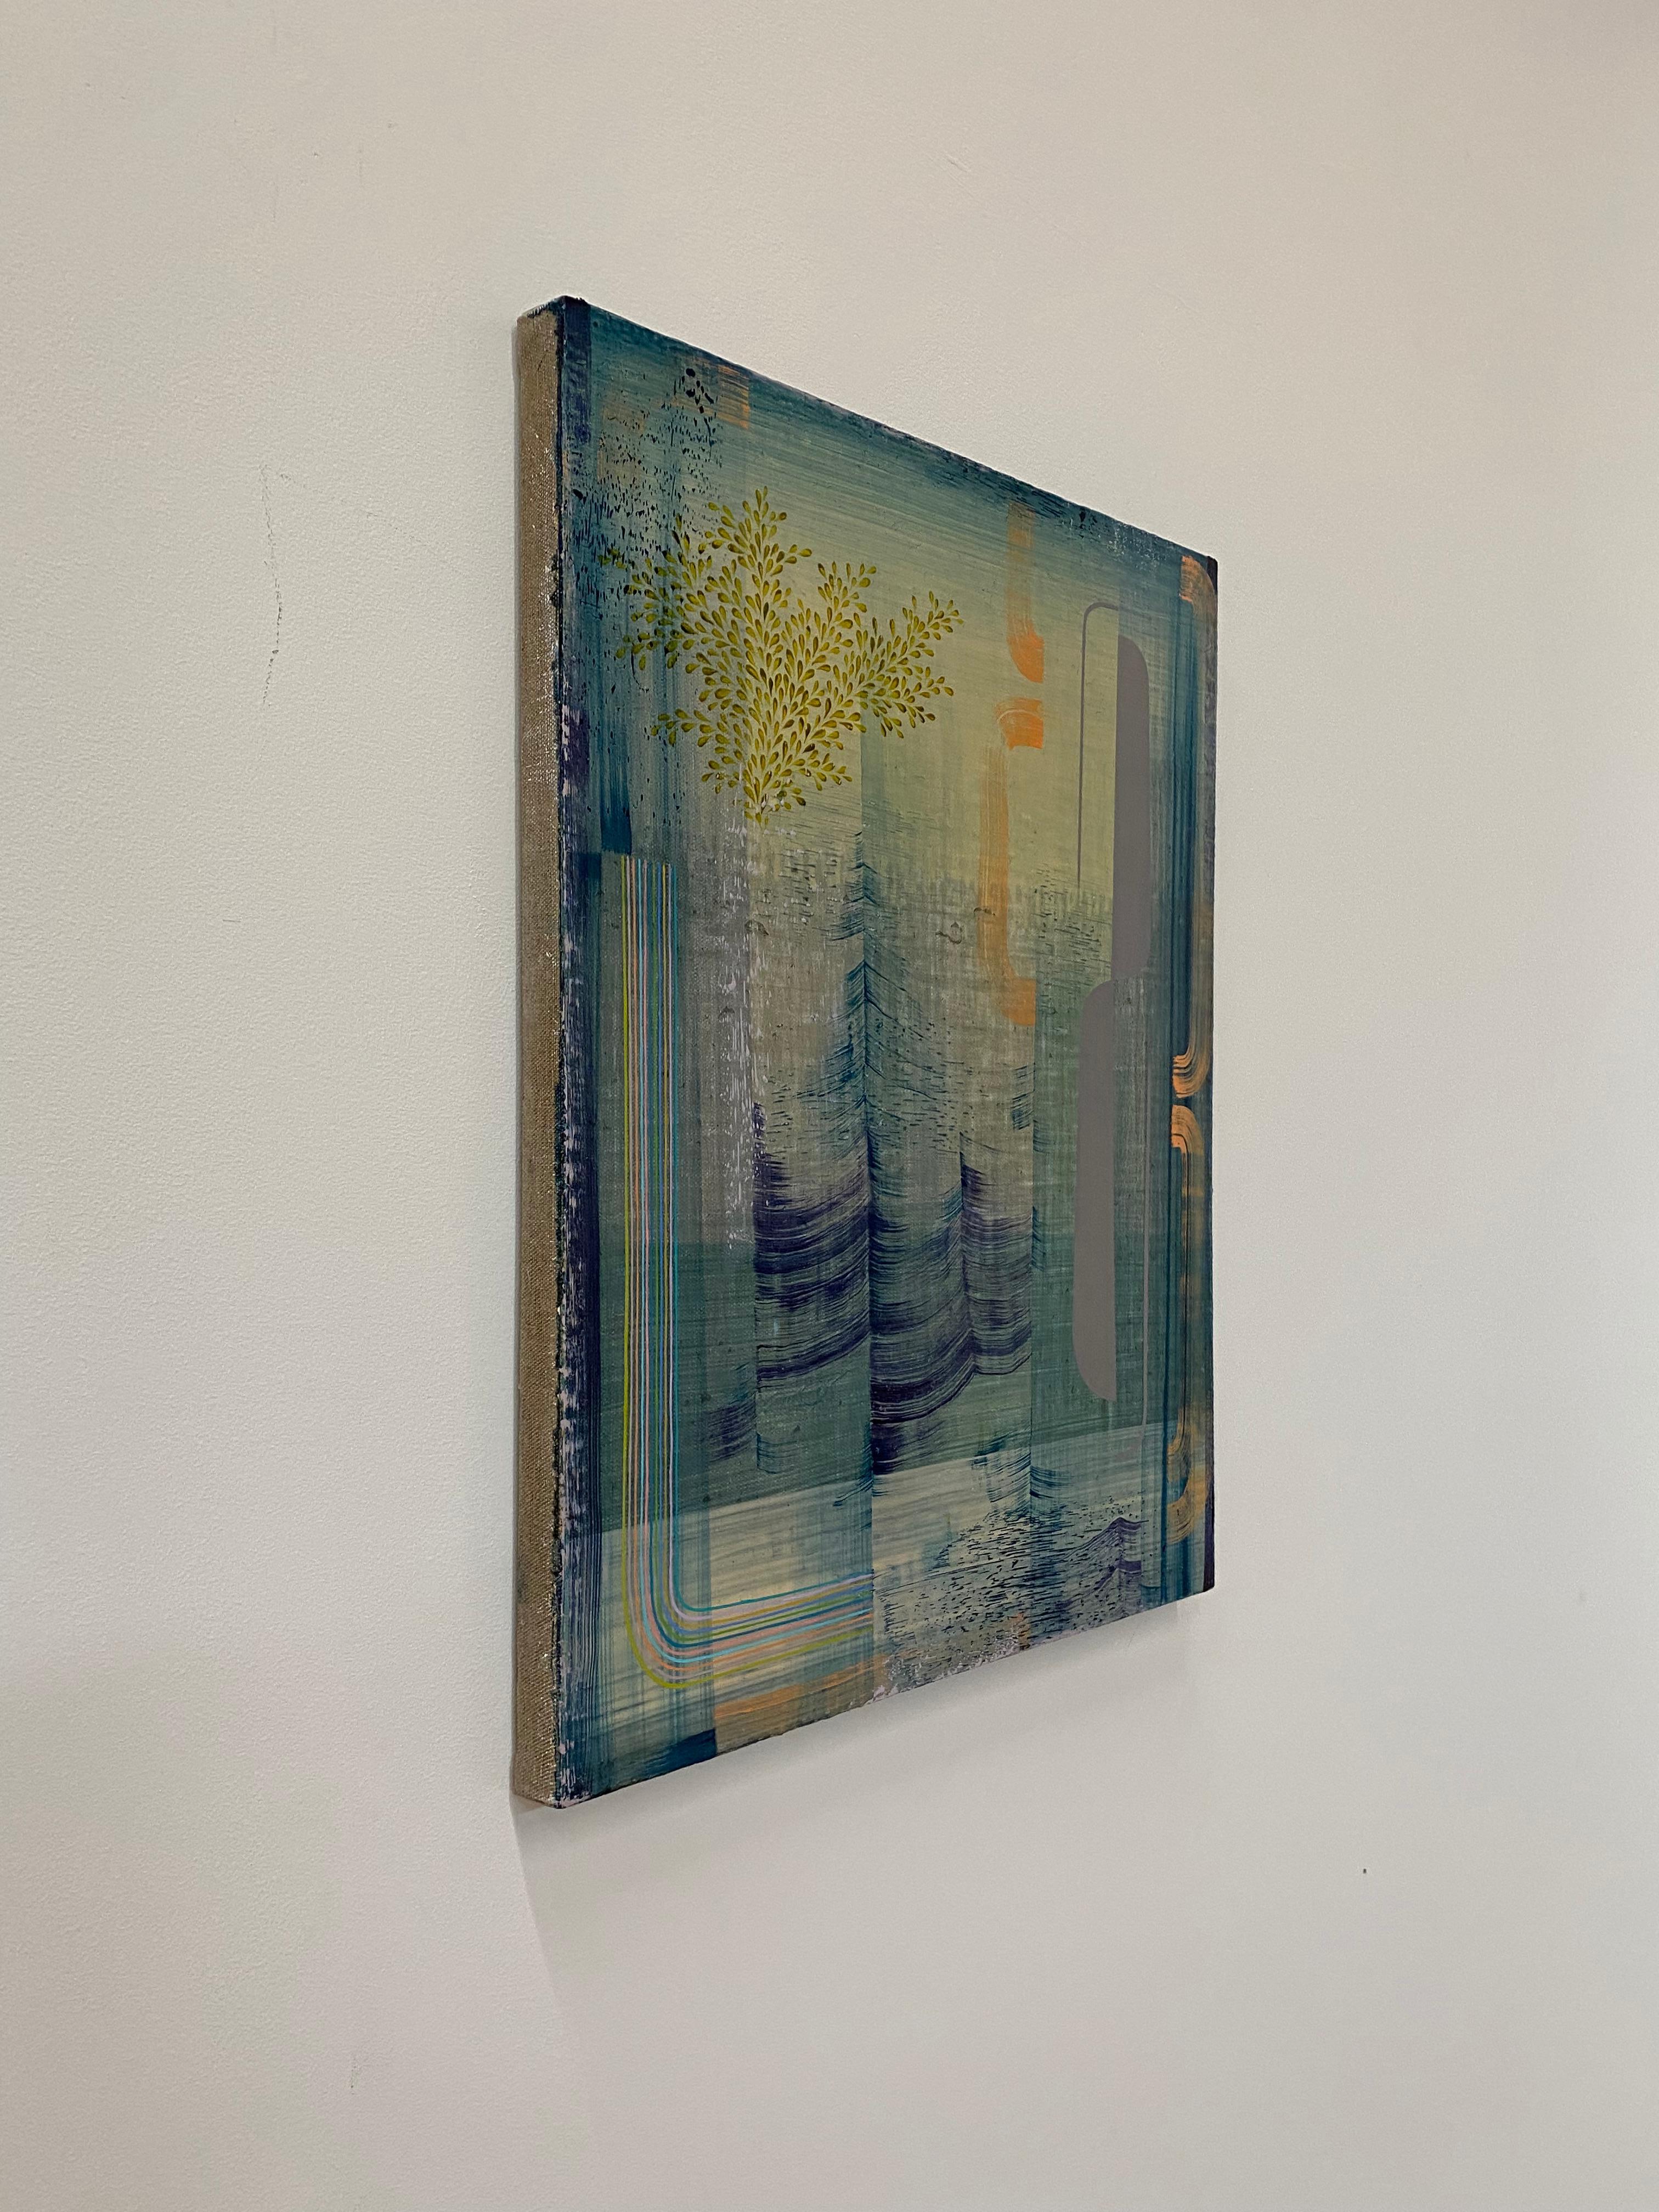 Carefully ordered patterns, geometric shapes and delicate lines in light periwinkle gray, pale peach and yellow ochre on a soft, atmospheric blue green background. Signed, dated and titled on verso.

Exploring a world beyond tangible reality, Brown